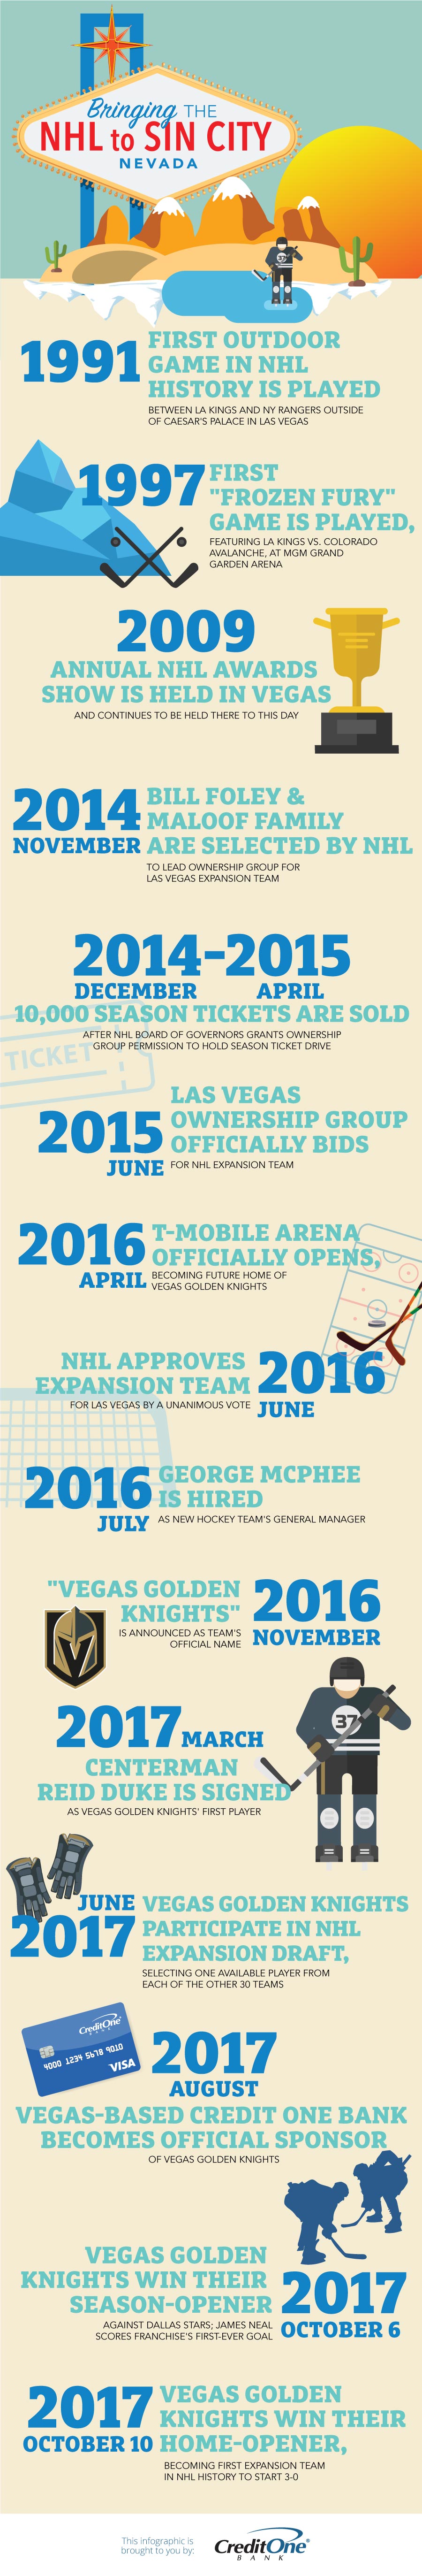 Bringing the NHL to Sin City [Infographic]